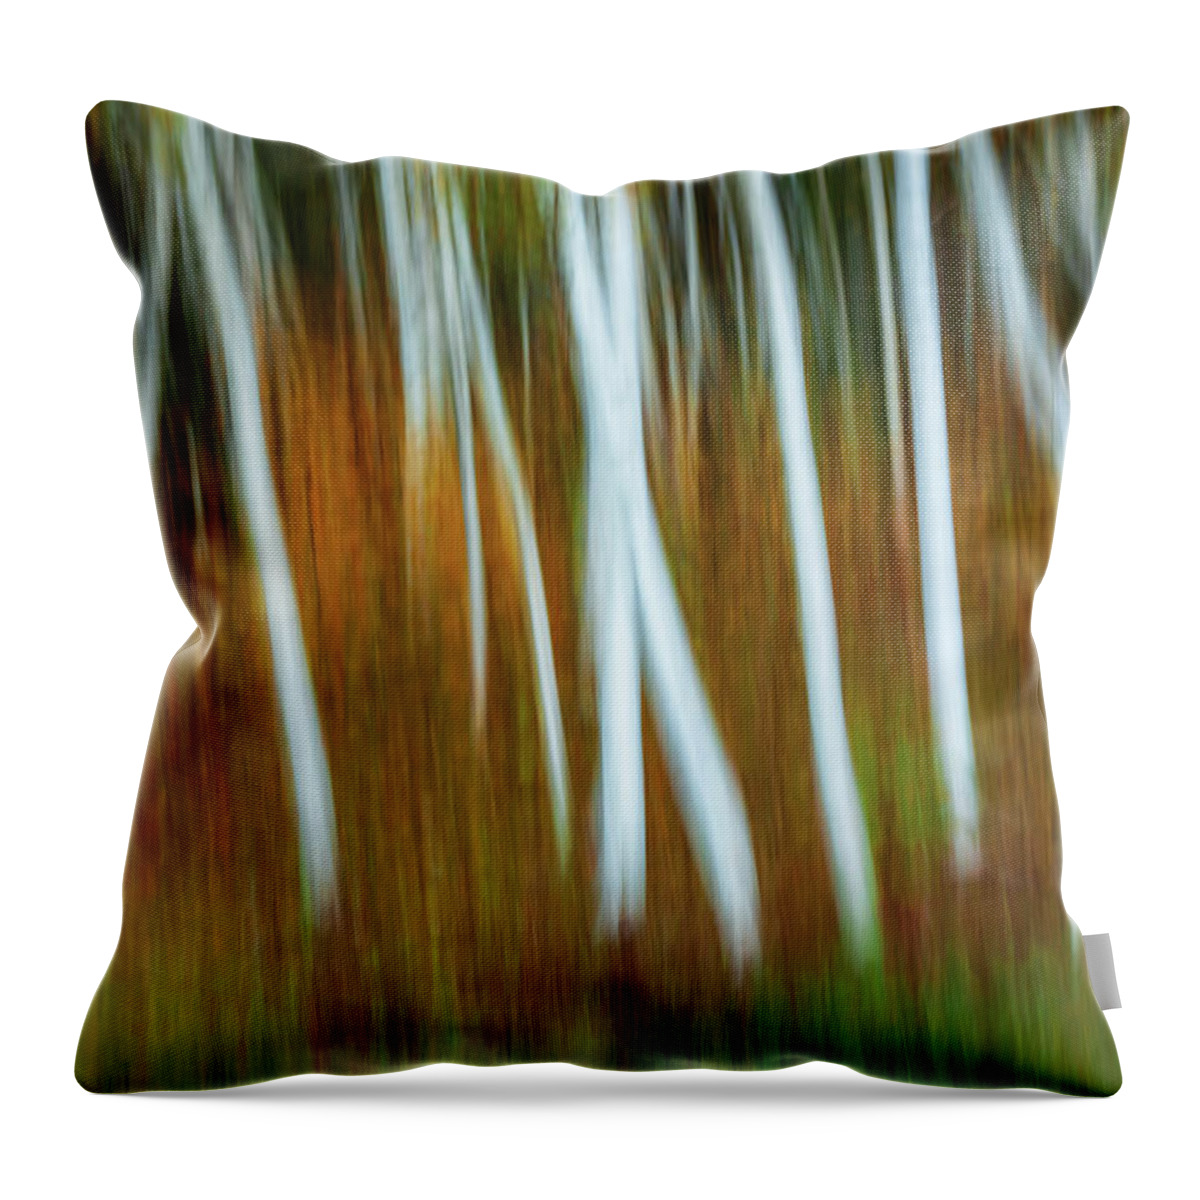  Throw Pillow featuring the photograph Acadia Aspens by Gary Johnson